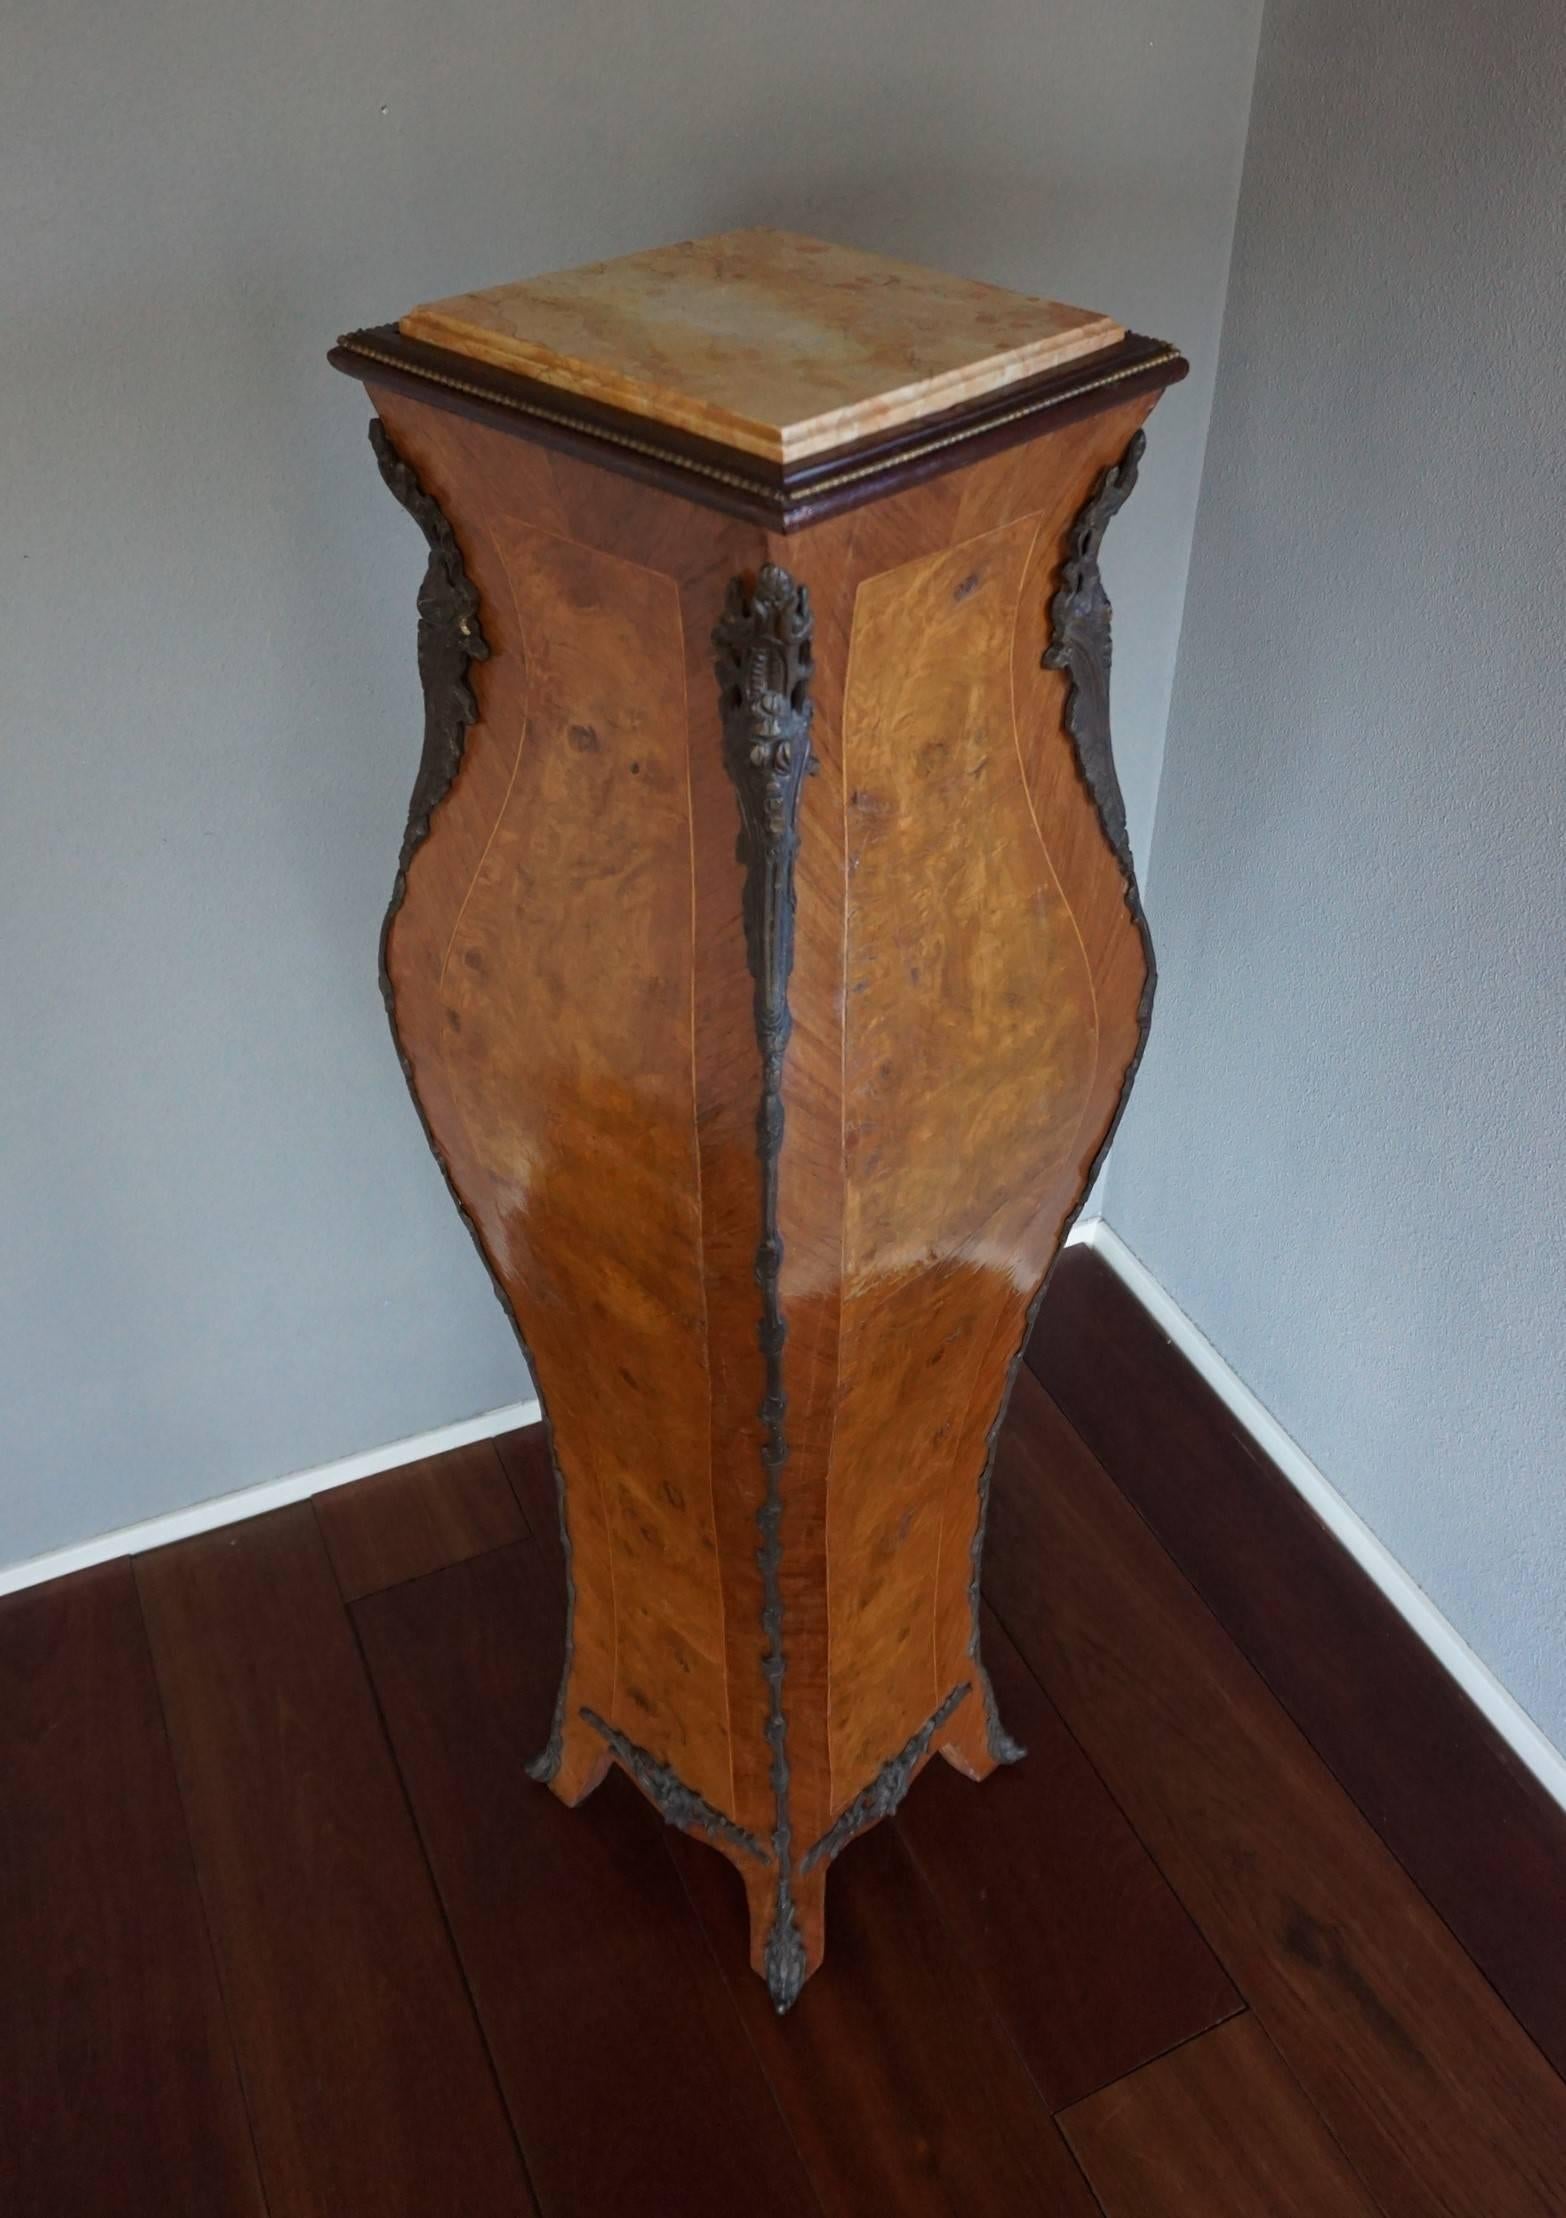 Stunning 20th century French column or display stand.

If you are looking for an impressive and highly stylish pedestal to grace your entrance or a certain part of your living room then this hand-crafted, French stand could be perfect for you. The